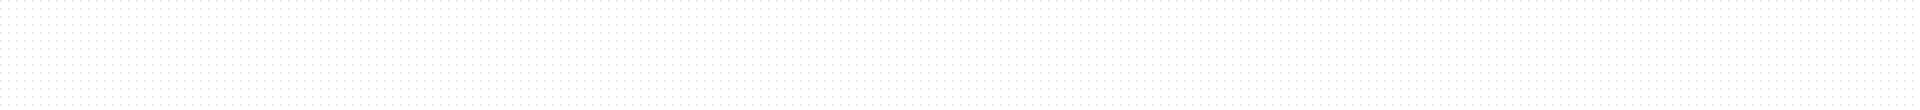 Background Dotted Pattern